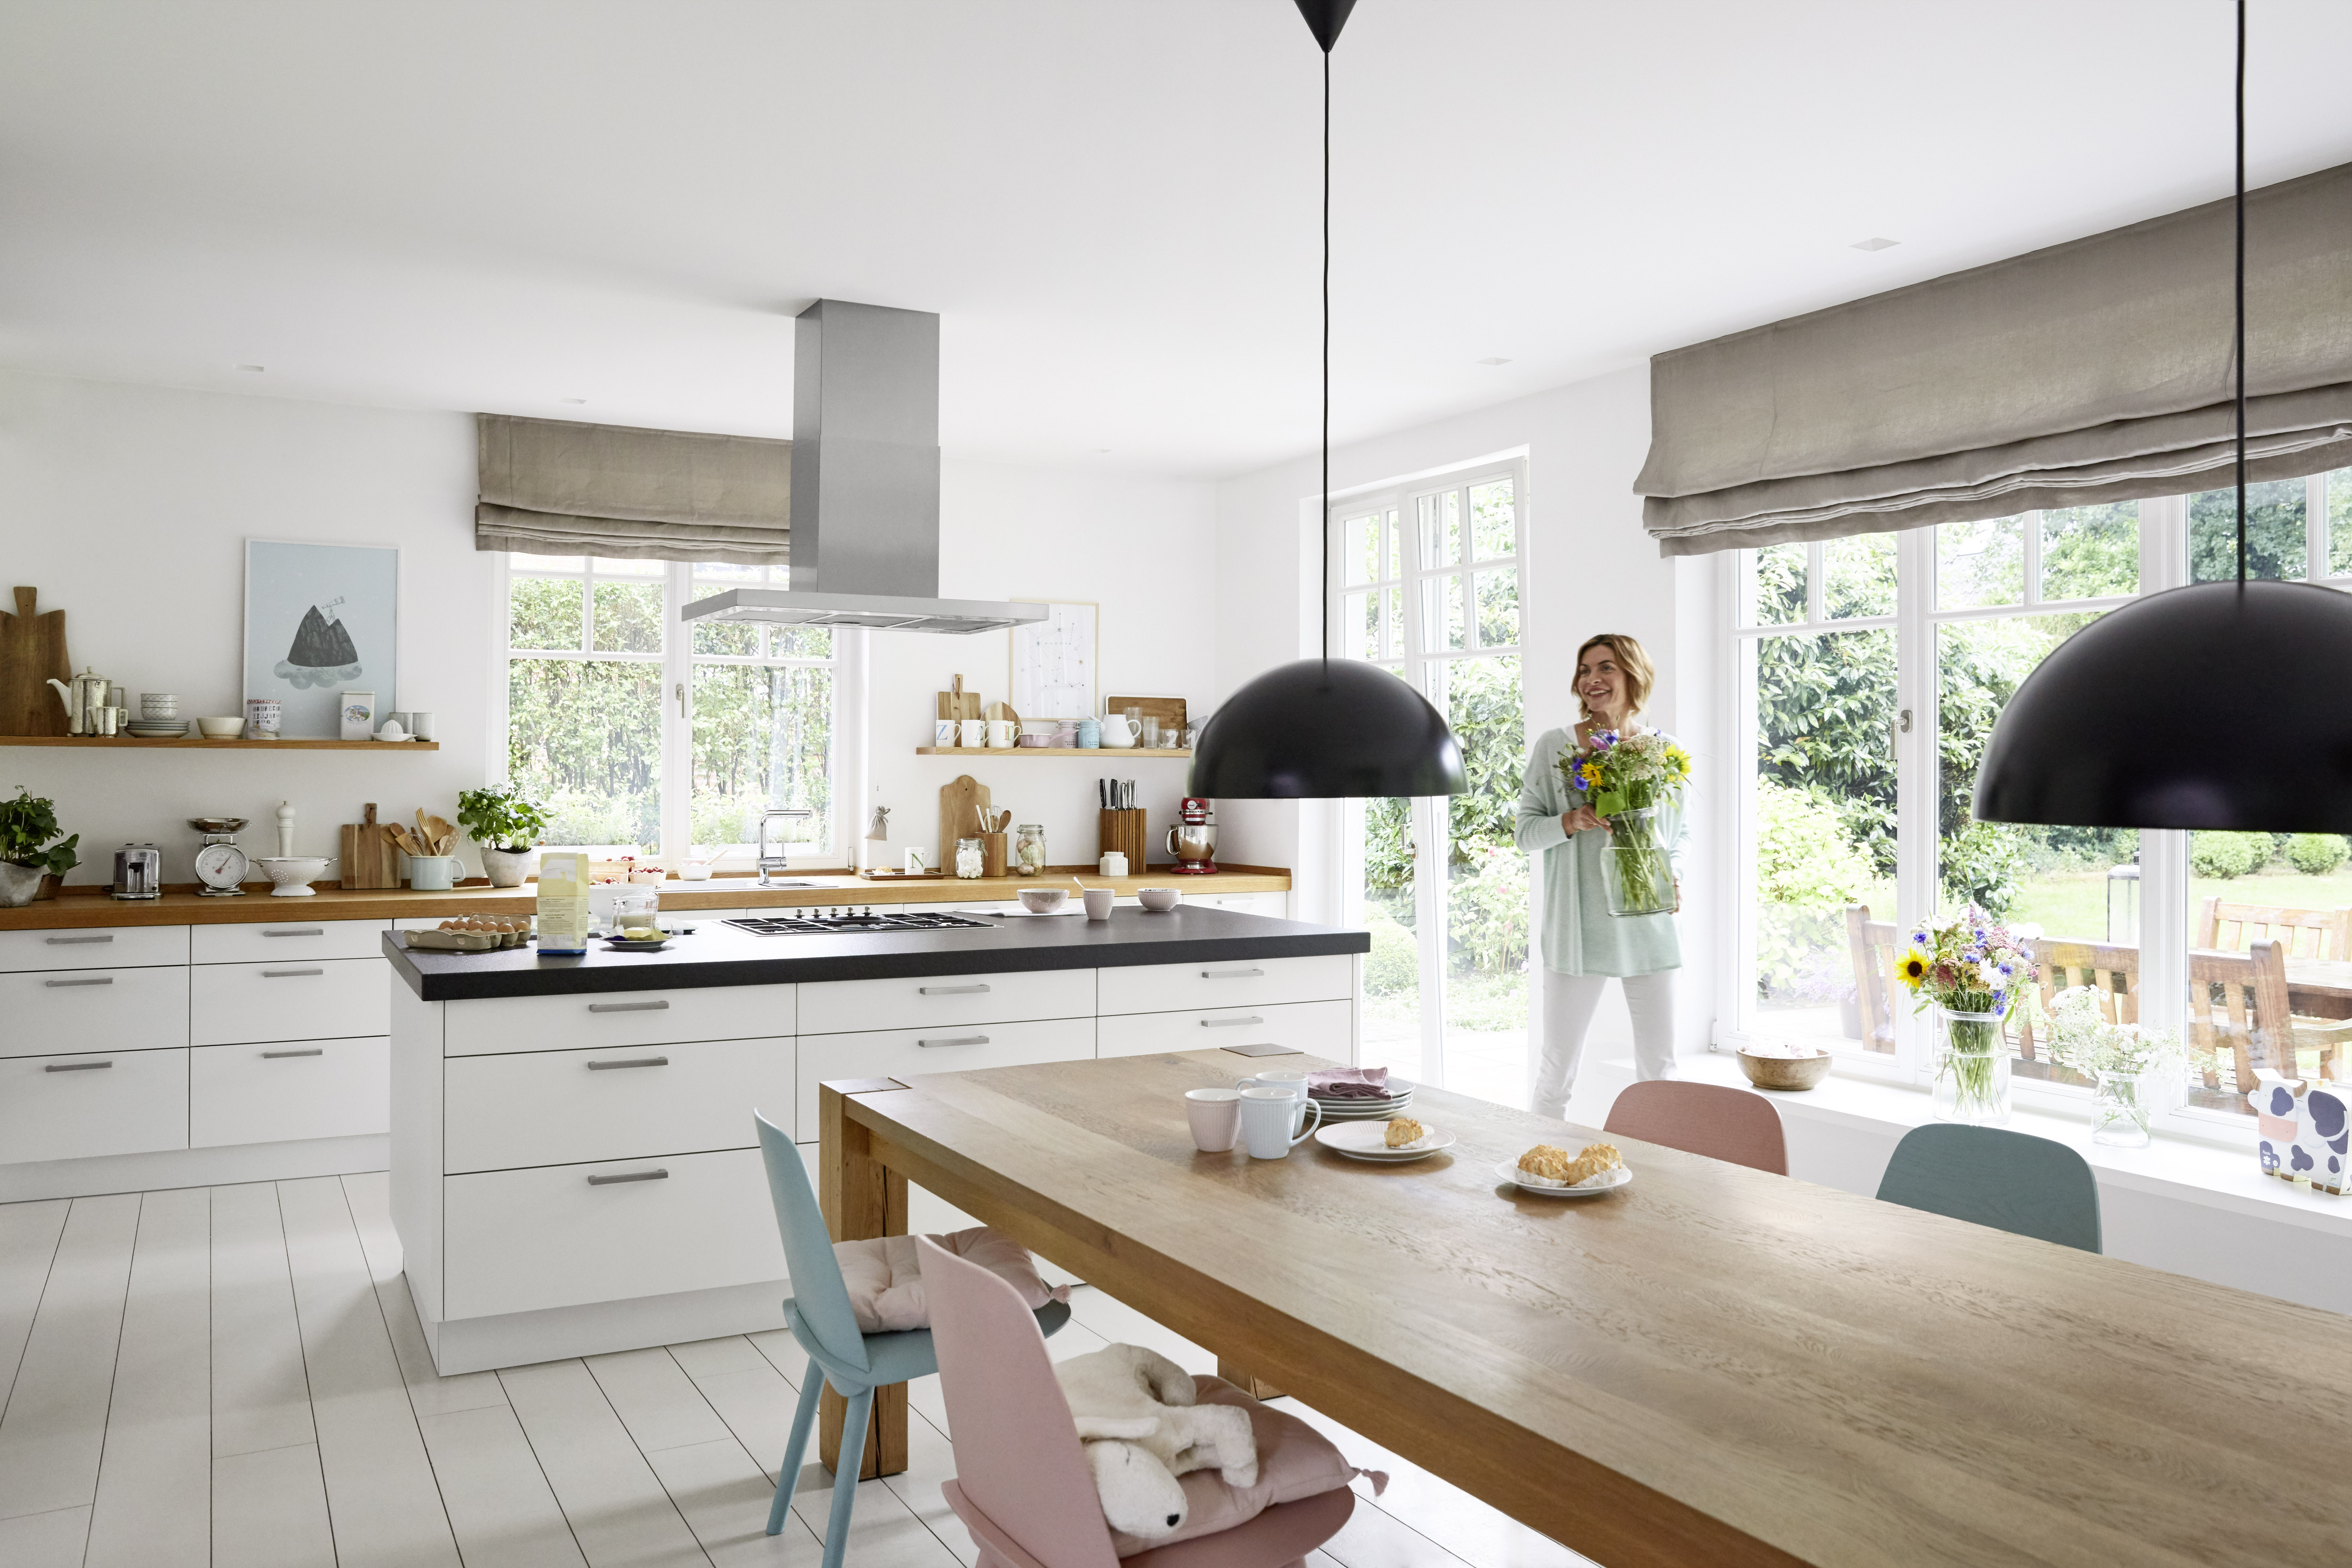 A kitchen in modern country house style